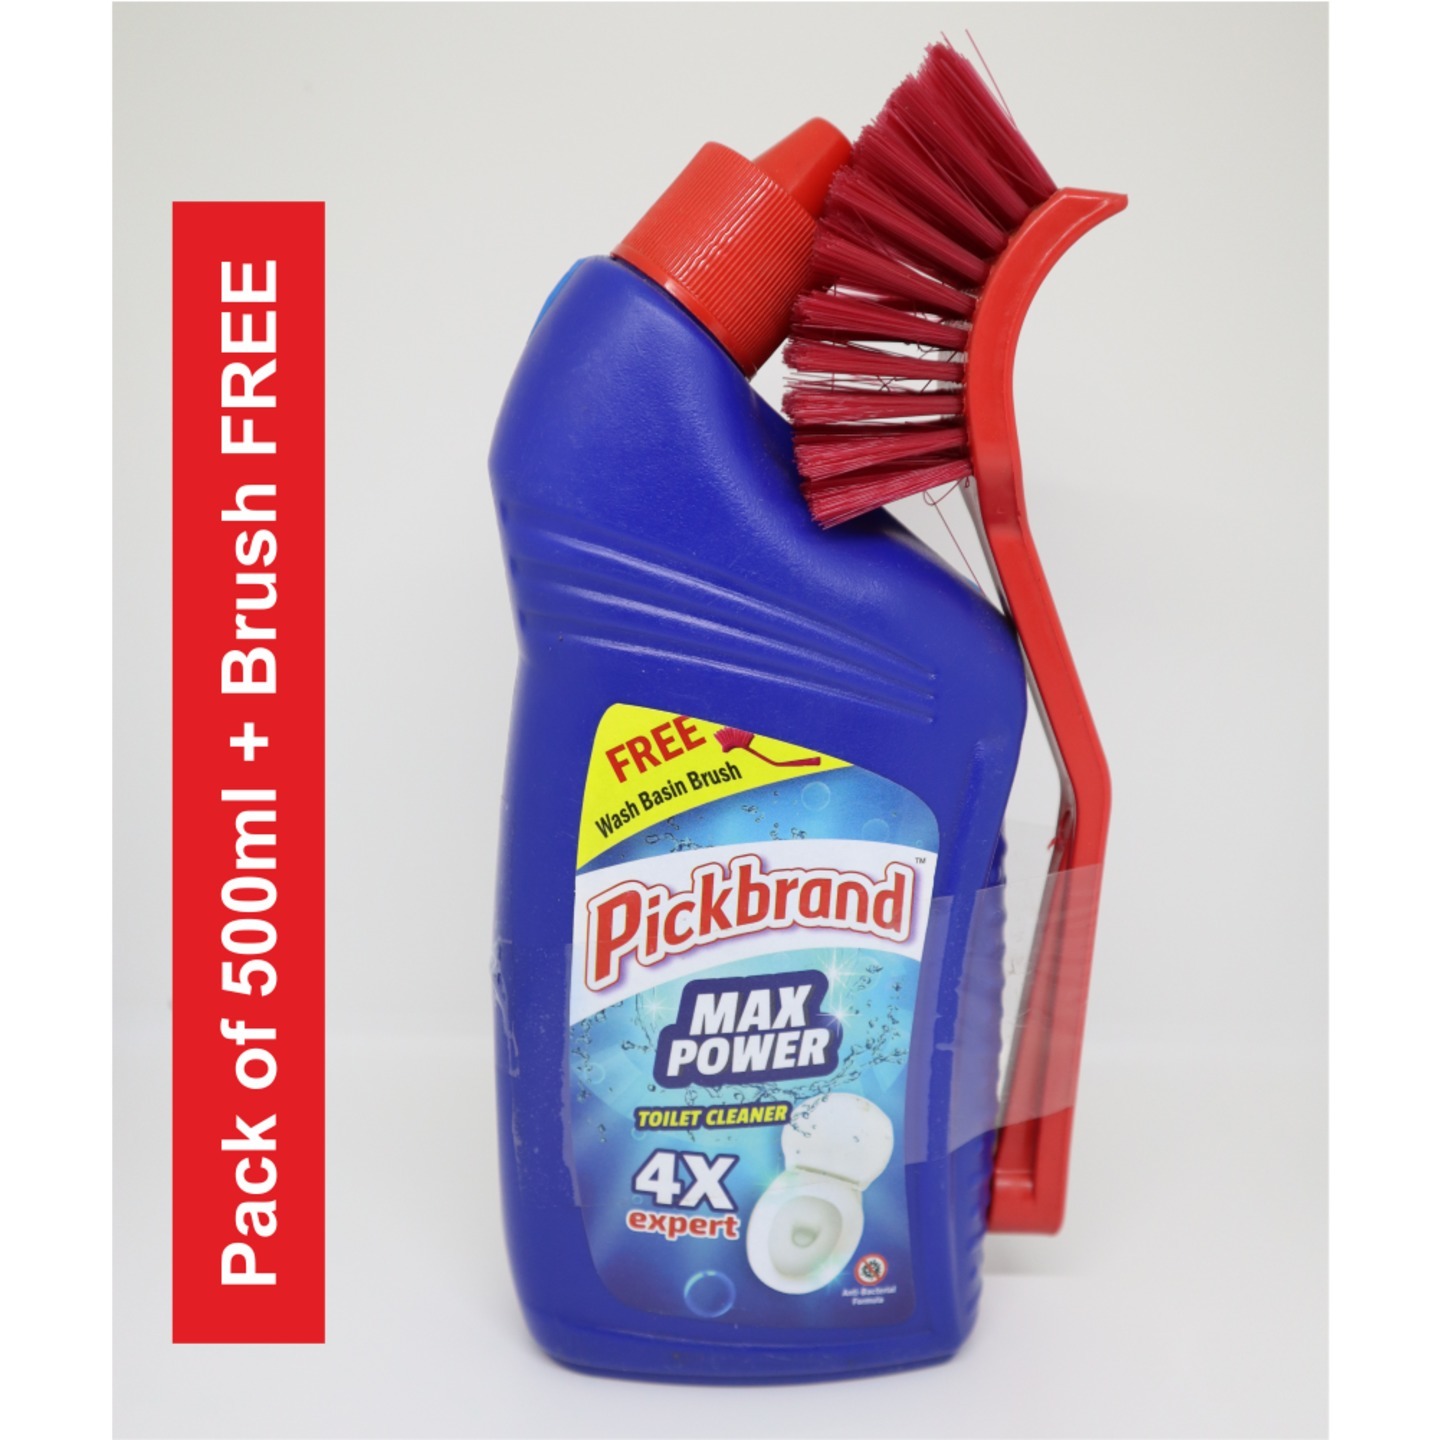 Pickbrand Max Power Germ & Anti Bacterial Disinfectant Toilet Cleaner- 500ml + Wash Basin Brush FREE